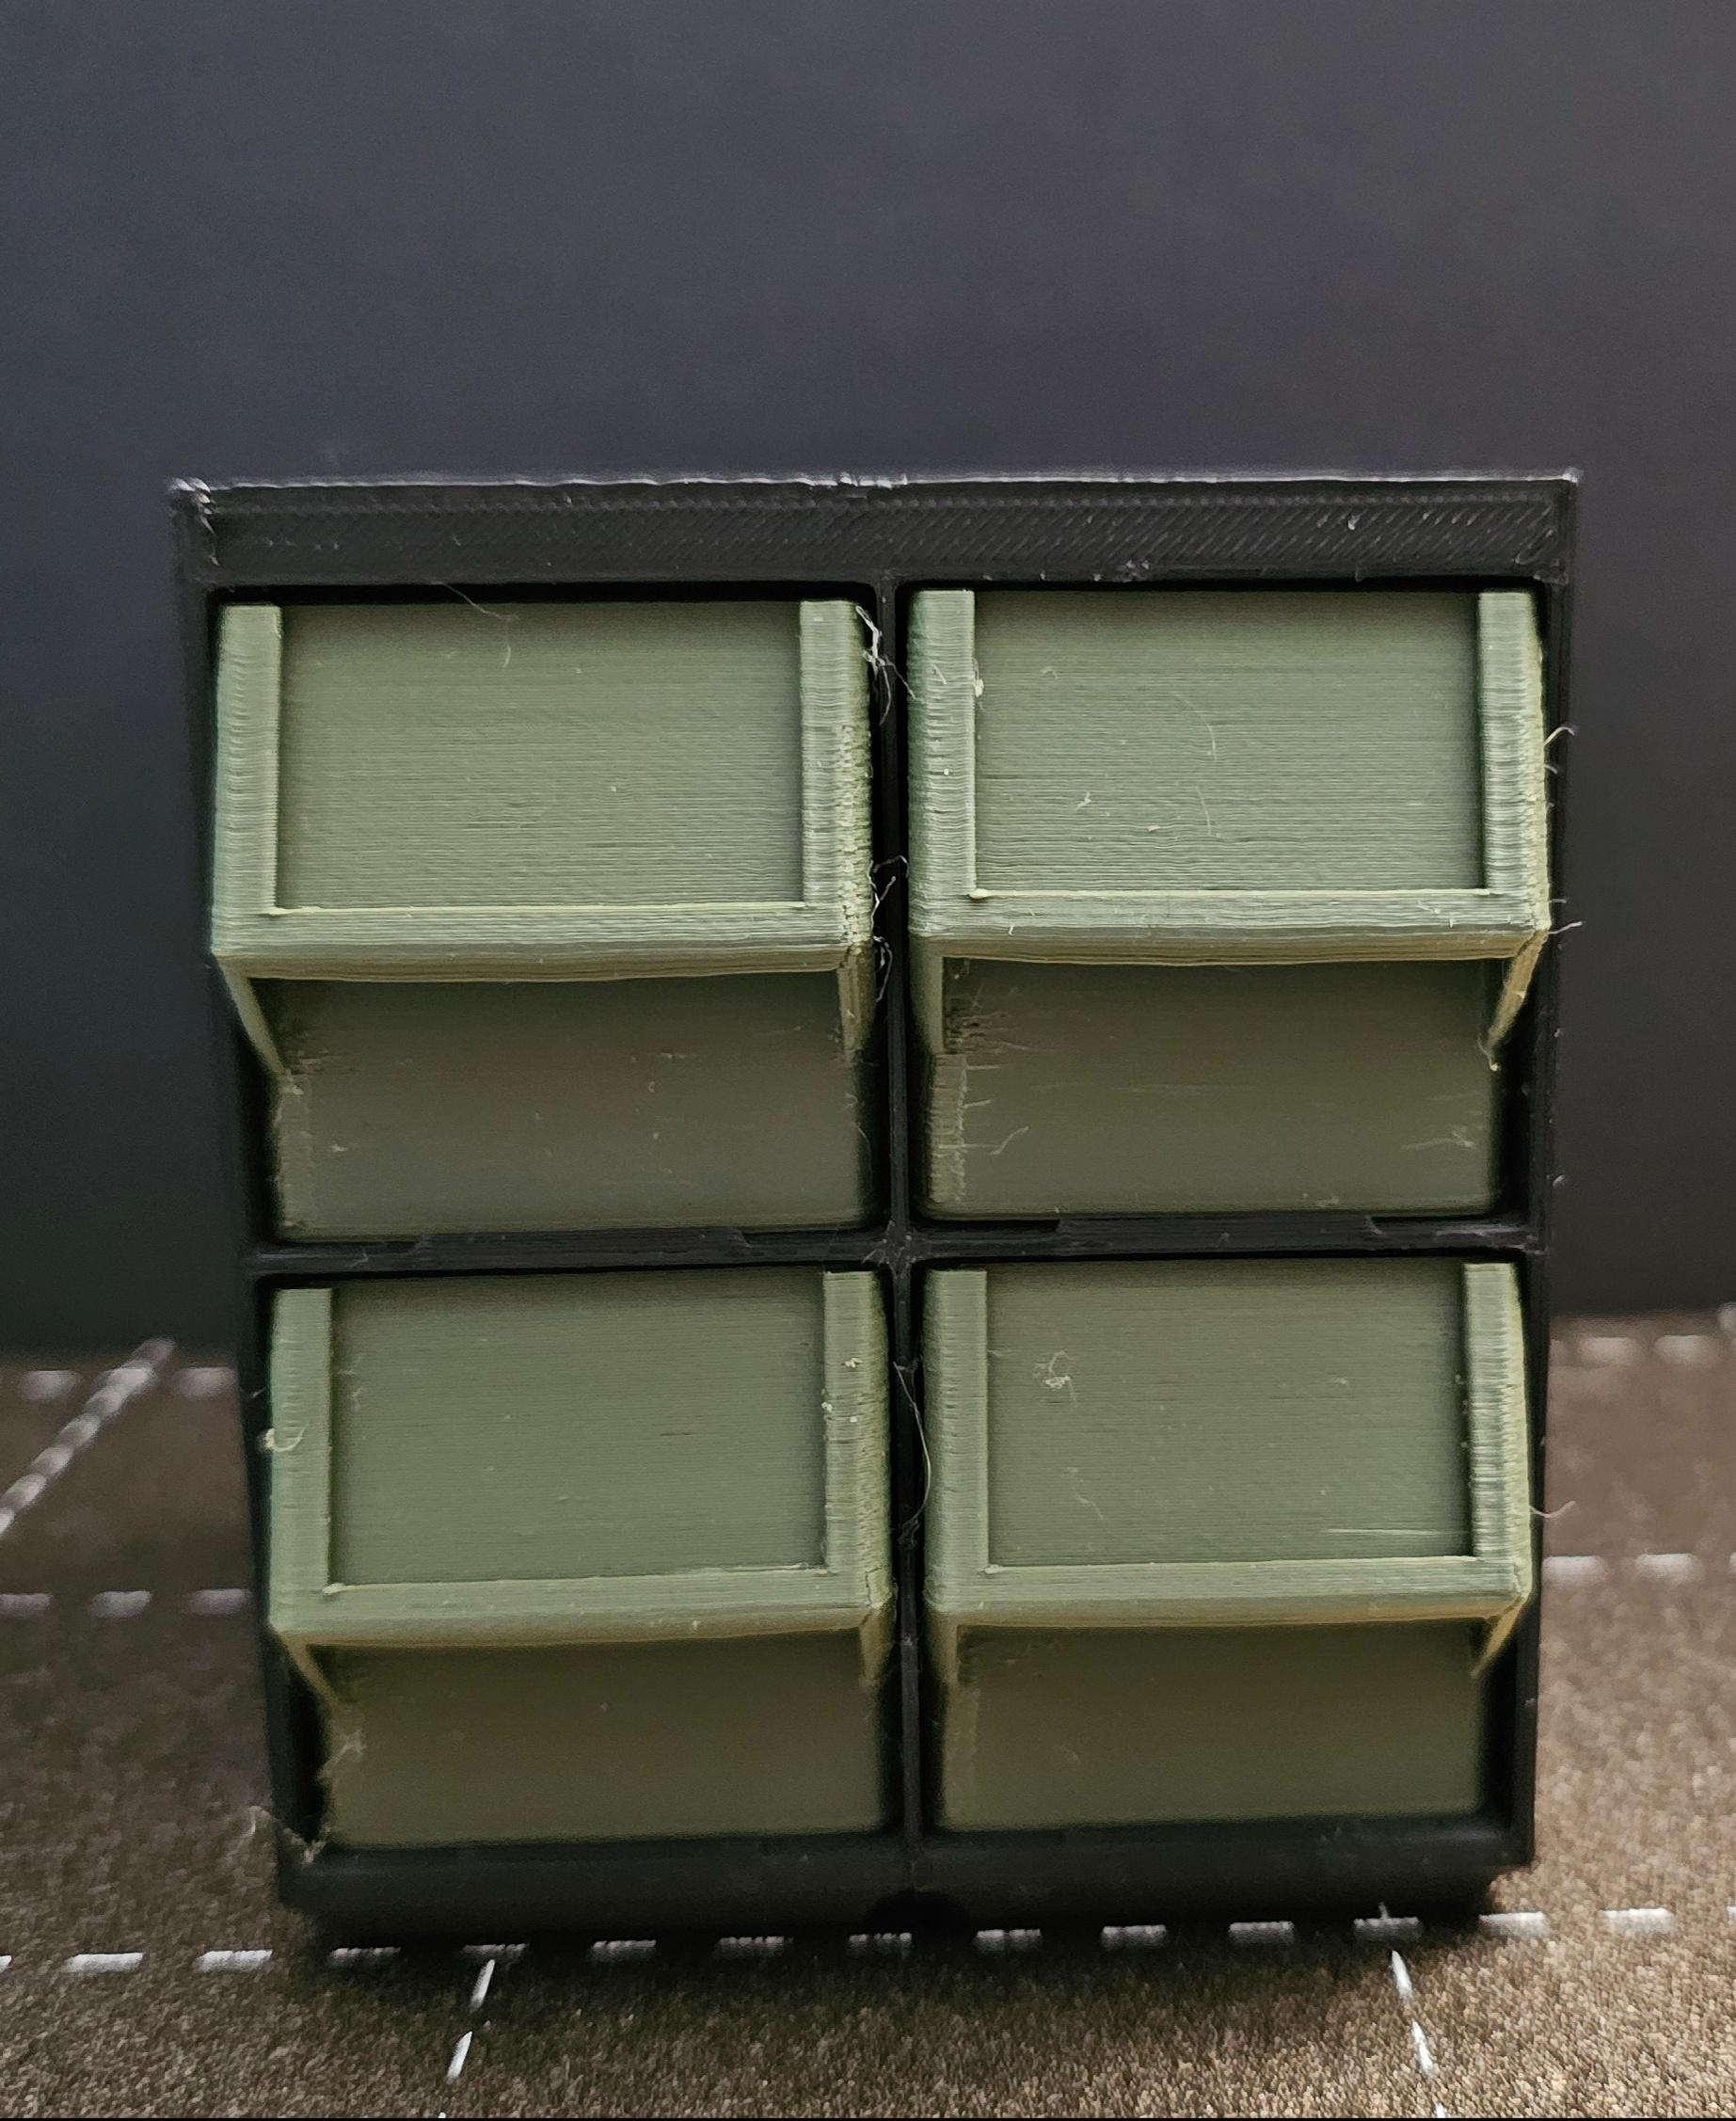 Screwfinity Unit 2U Large - The FREE Gridfinity Storage Unit - To Screwfinity and beyond...
Filaments.ca Value PLA (no longer available) and Eryone Mette Green Hyper PLA  - 3d model